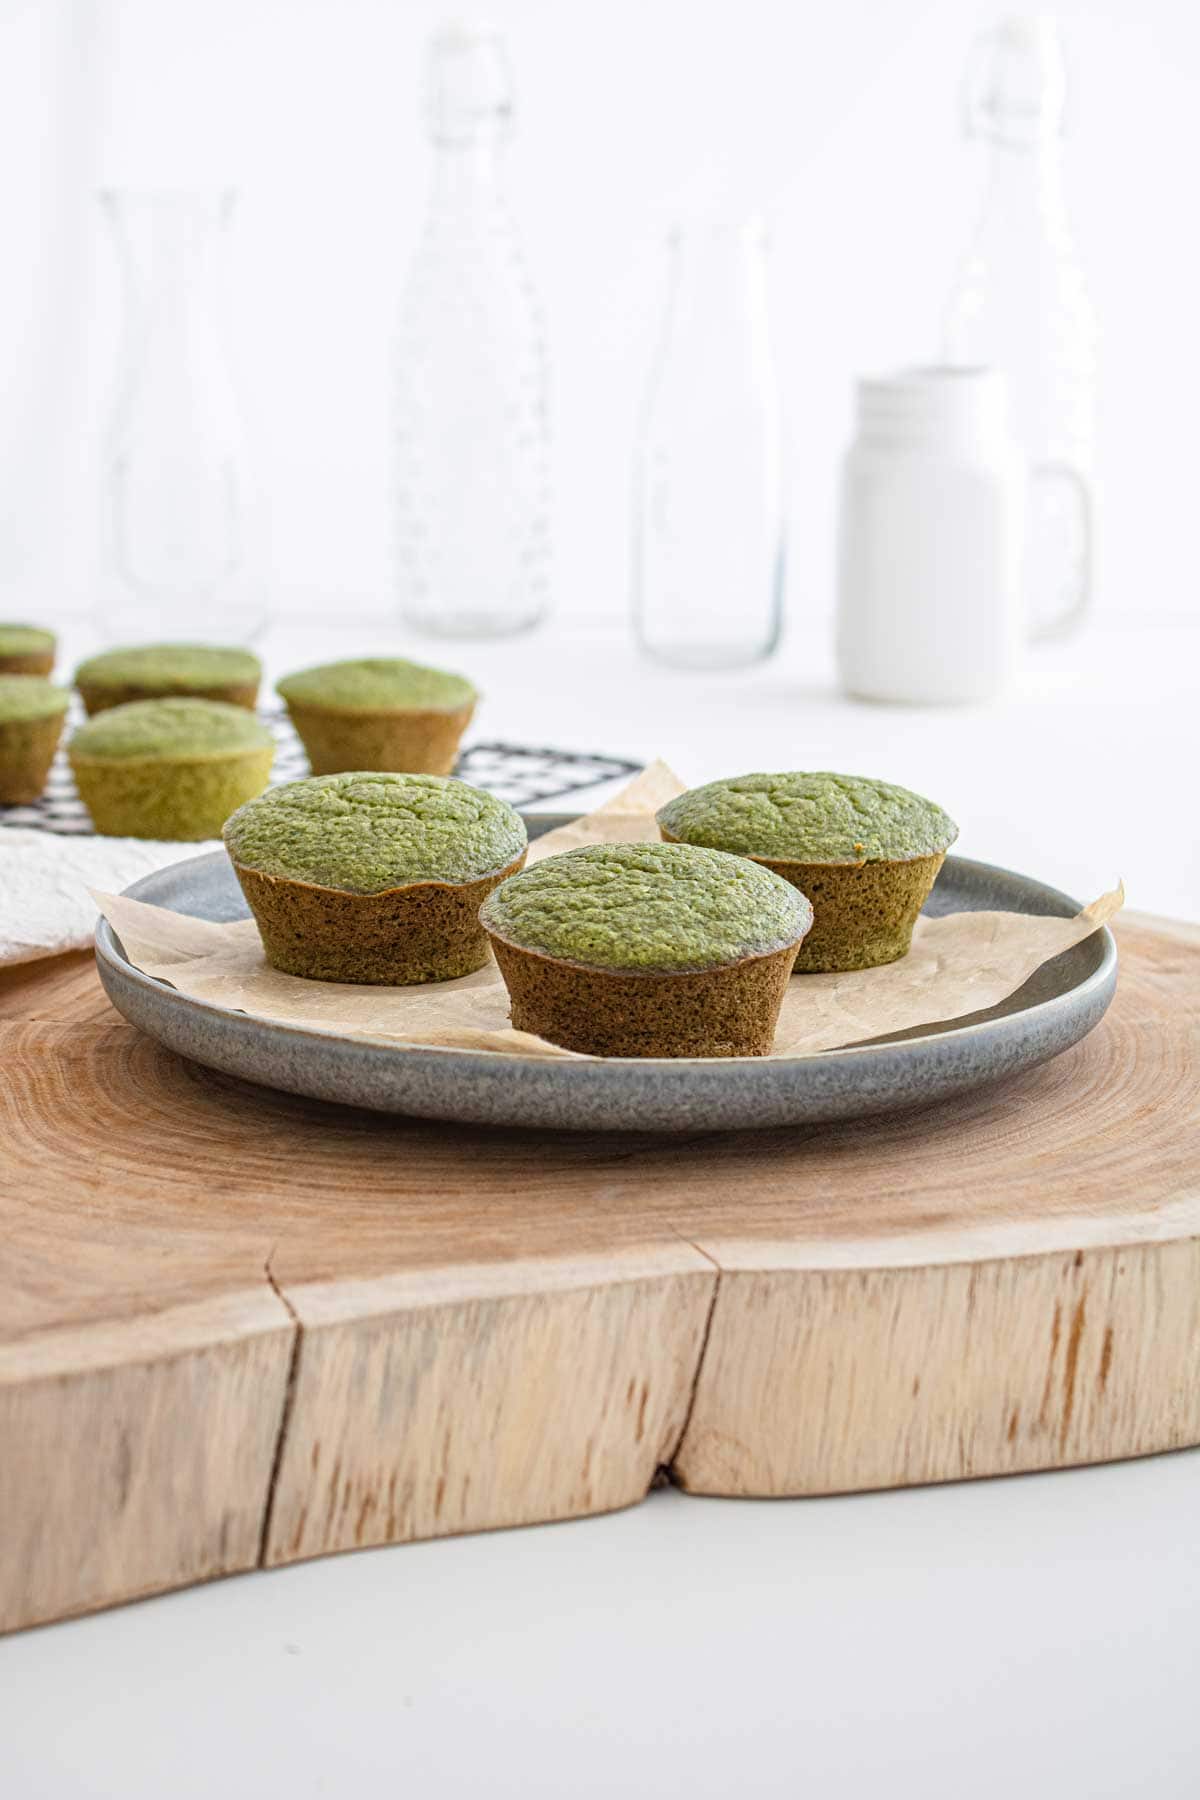 Green spinach and banana muffins on a wooden plate.